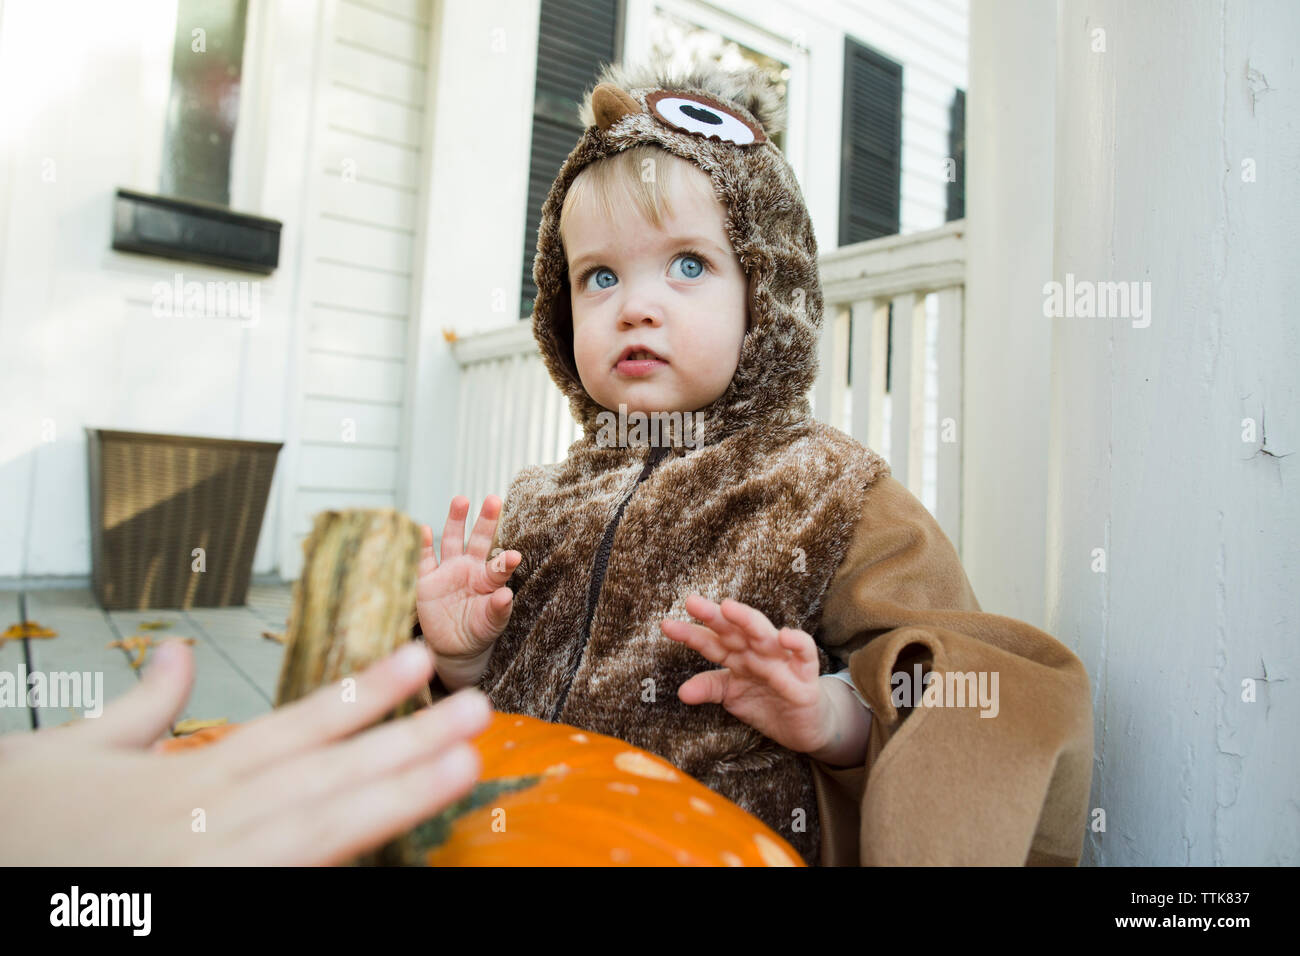 Toddler boy looks into distance while dressed up in Halloween costume Stock Photo